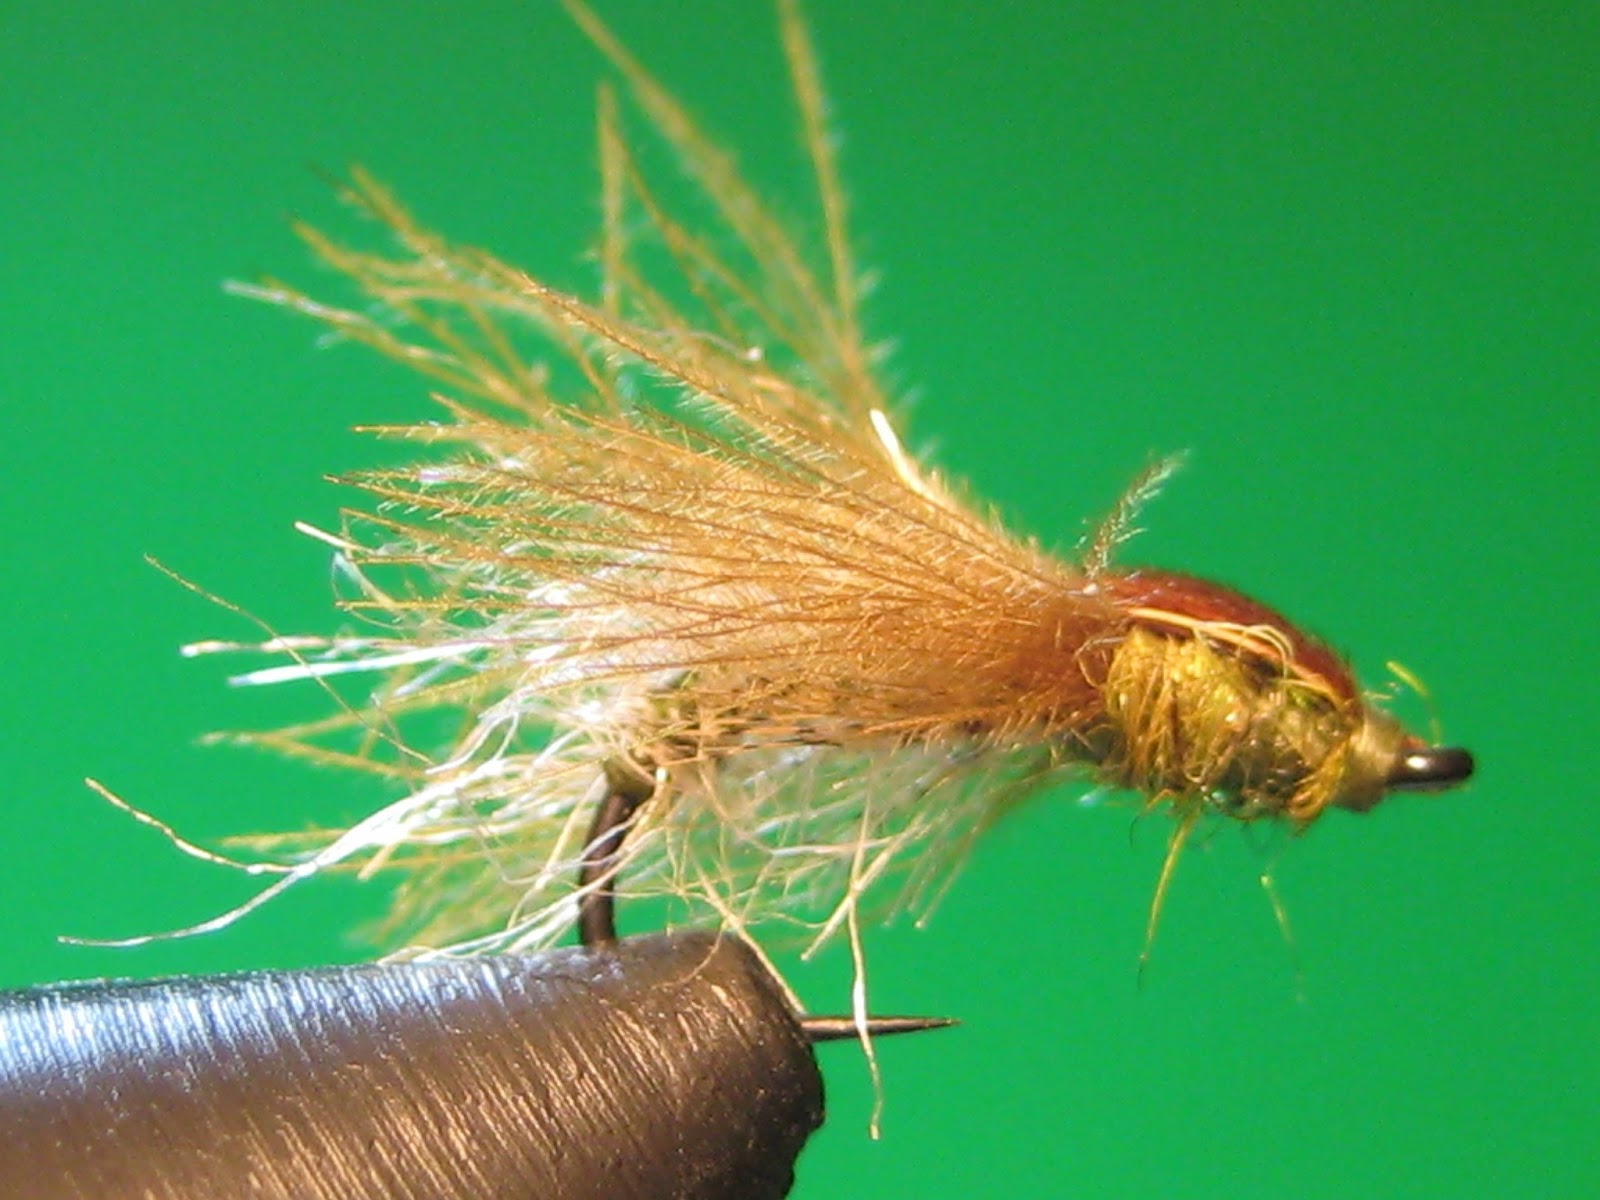 My Trout Fly: Caddis pupa emerger